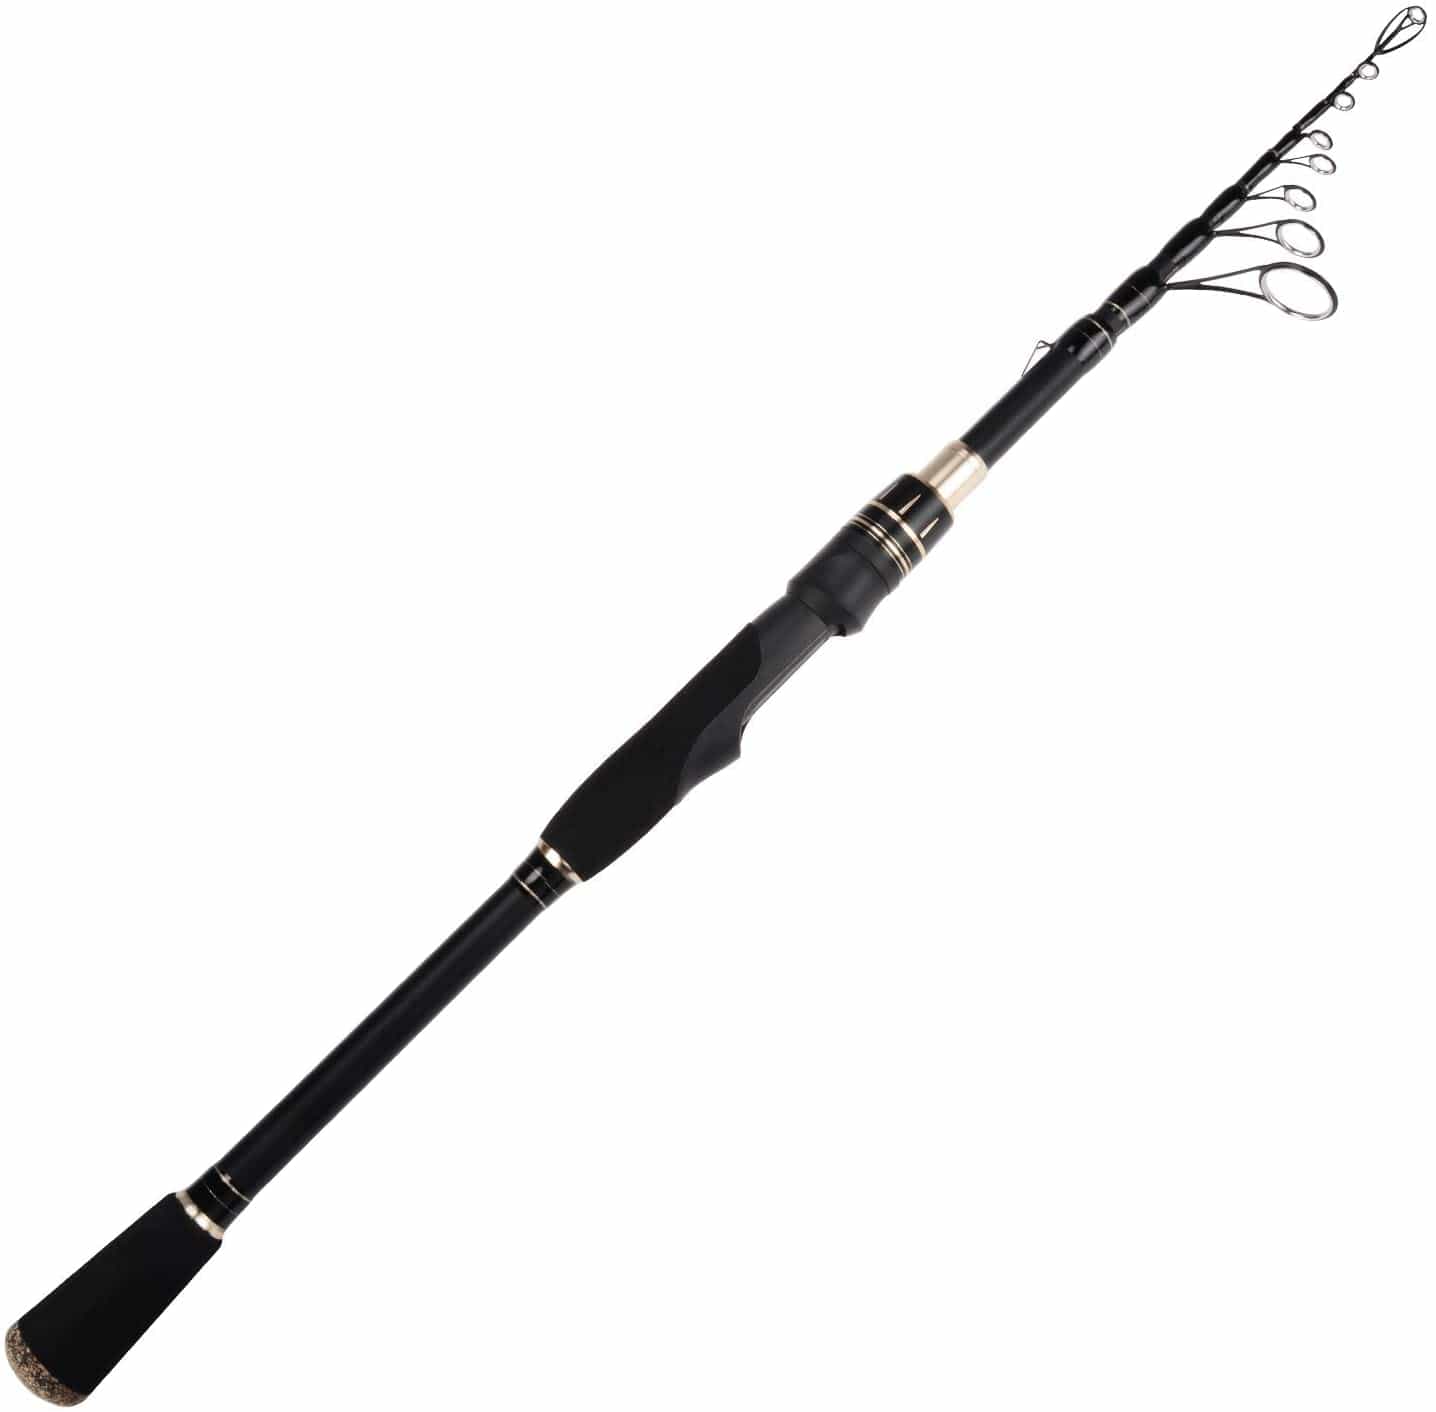 Fishing Gear Set Spinning Fishing Rod Ultralight Carbon Fiber Portable  Retractable Handle Telescopic Fishing Pole for Bass Salmon Trout Fishing